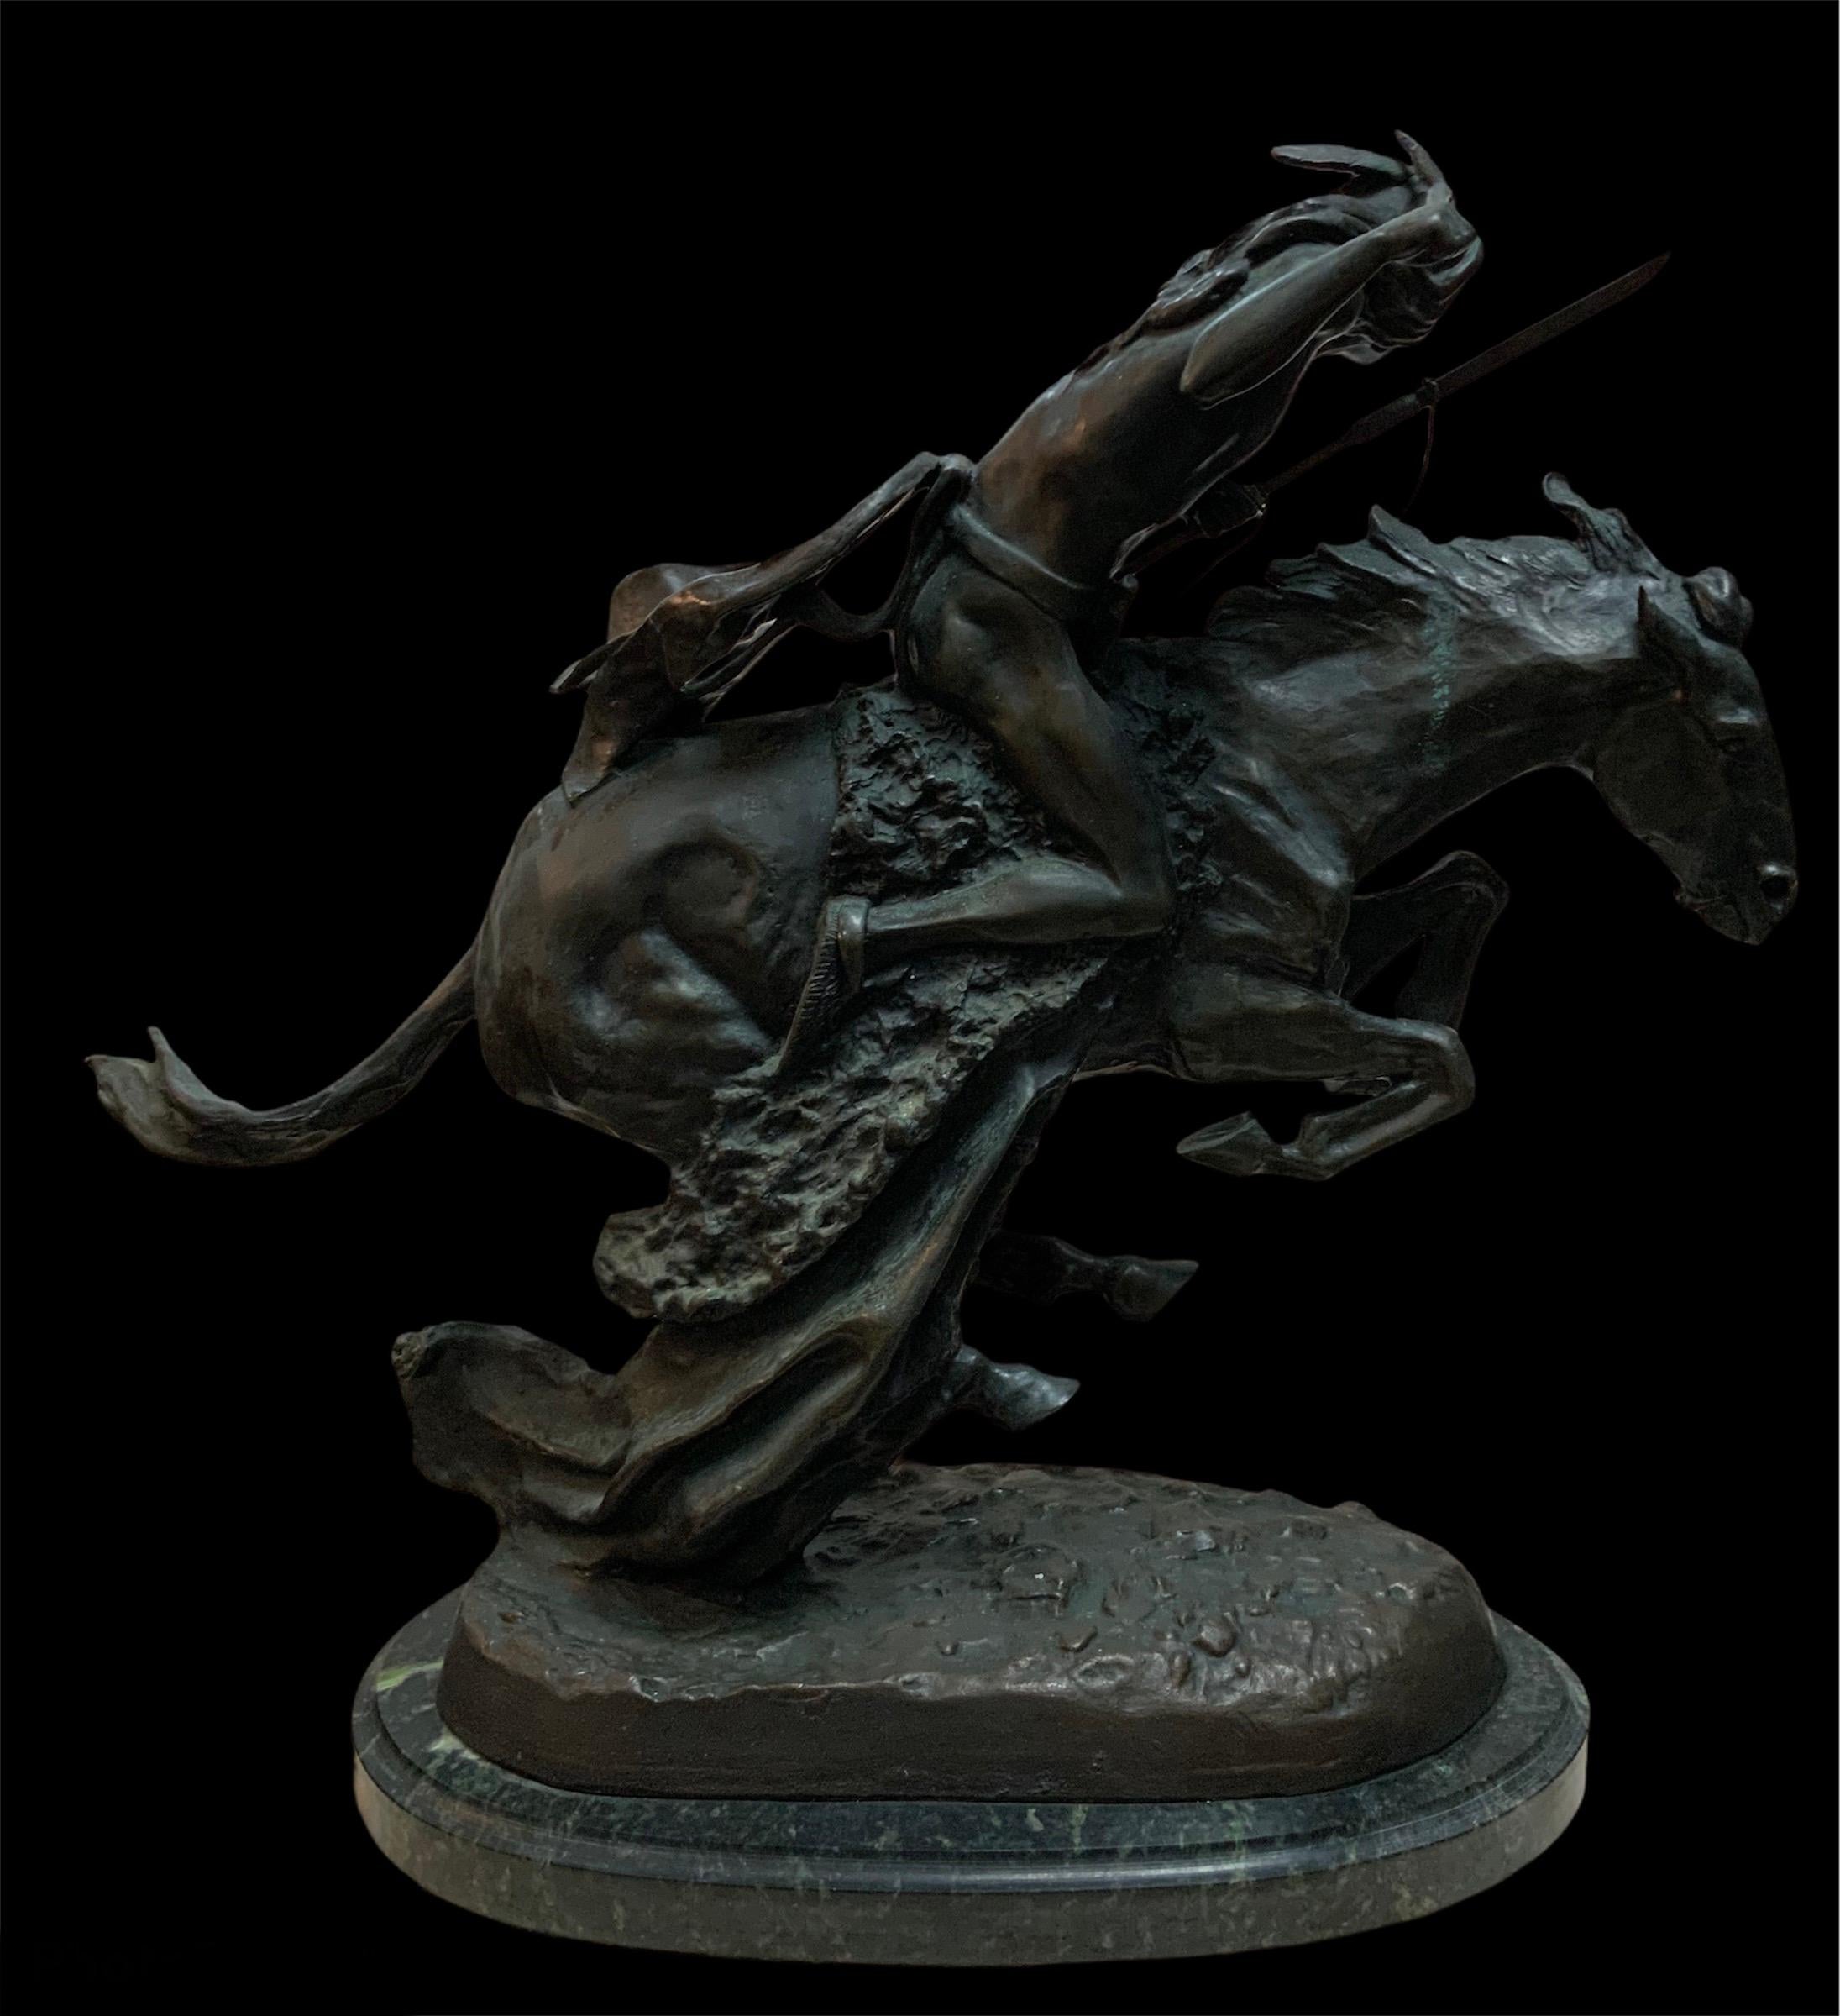 American Classical Cheyenne Bronze Sculpture by Frederic Remington